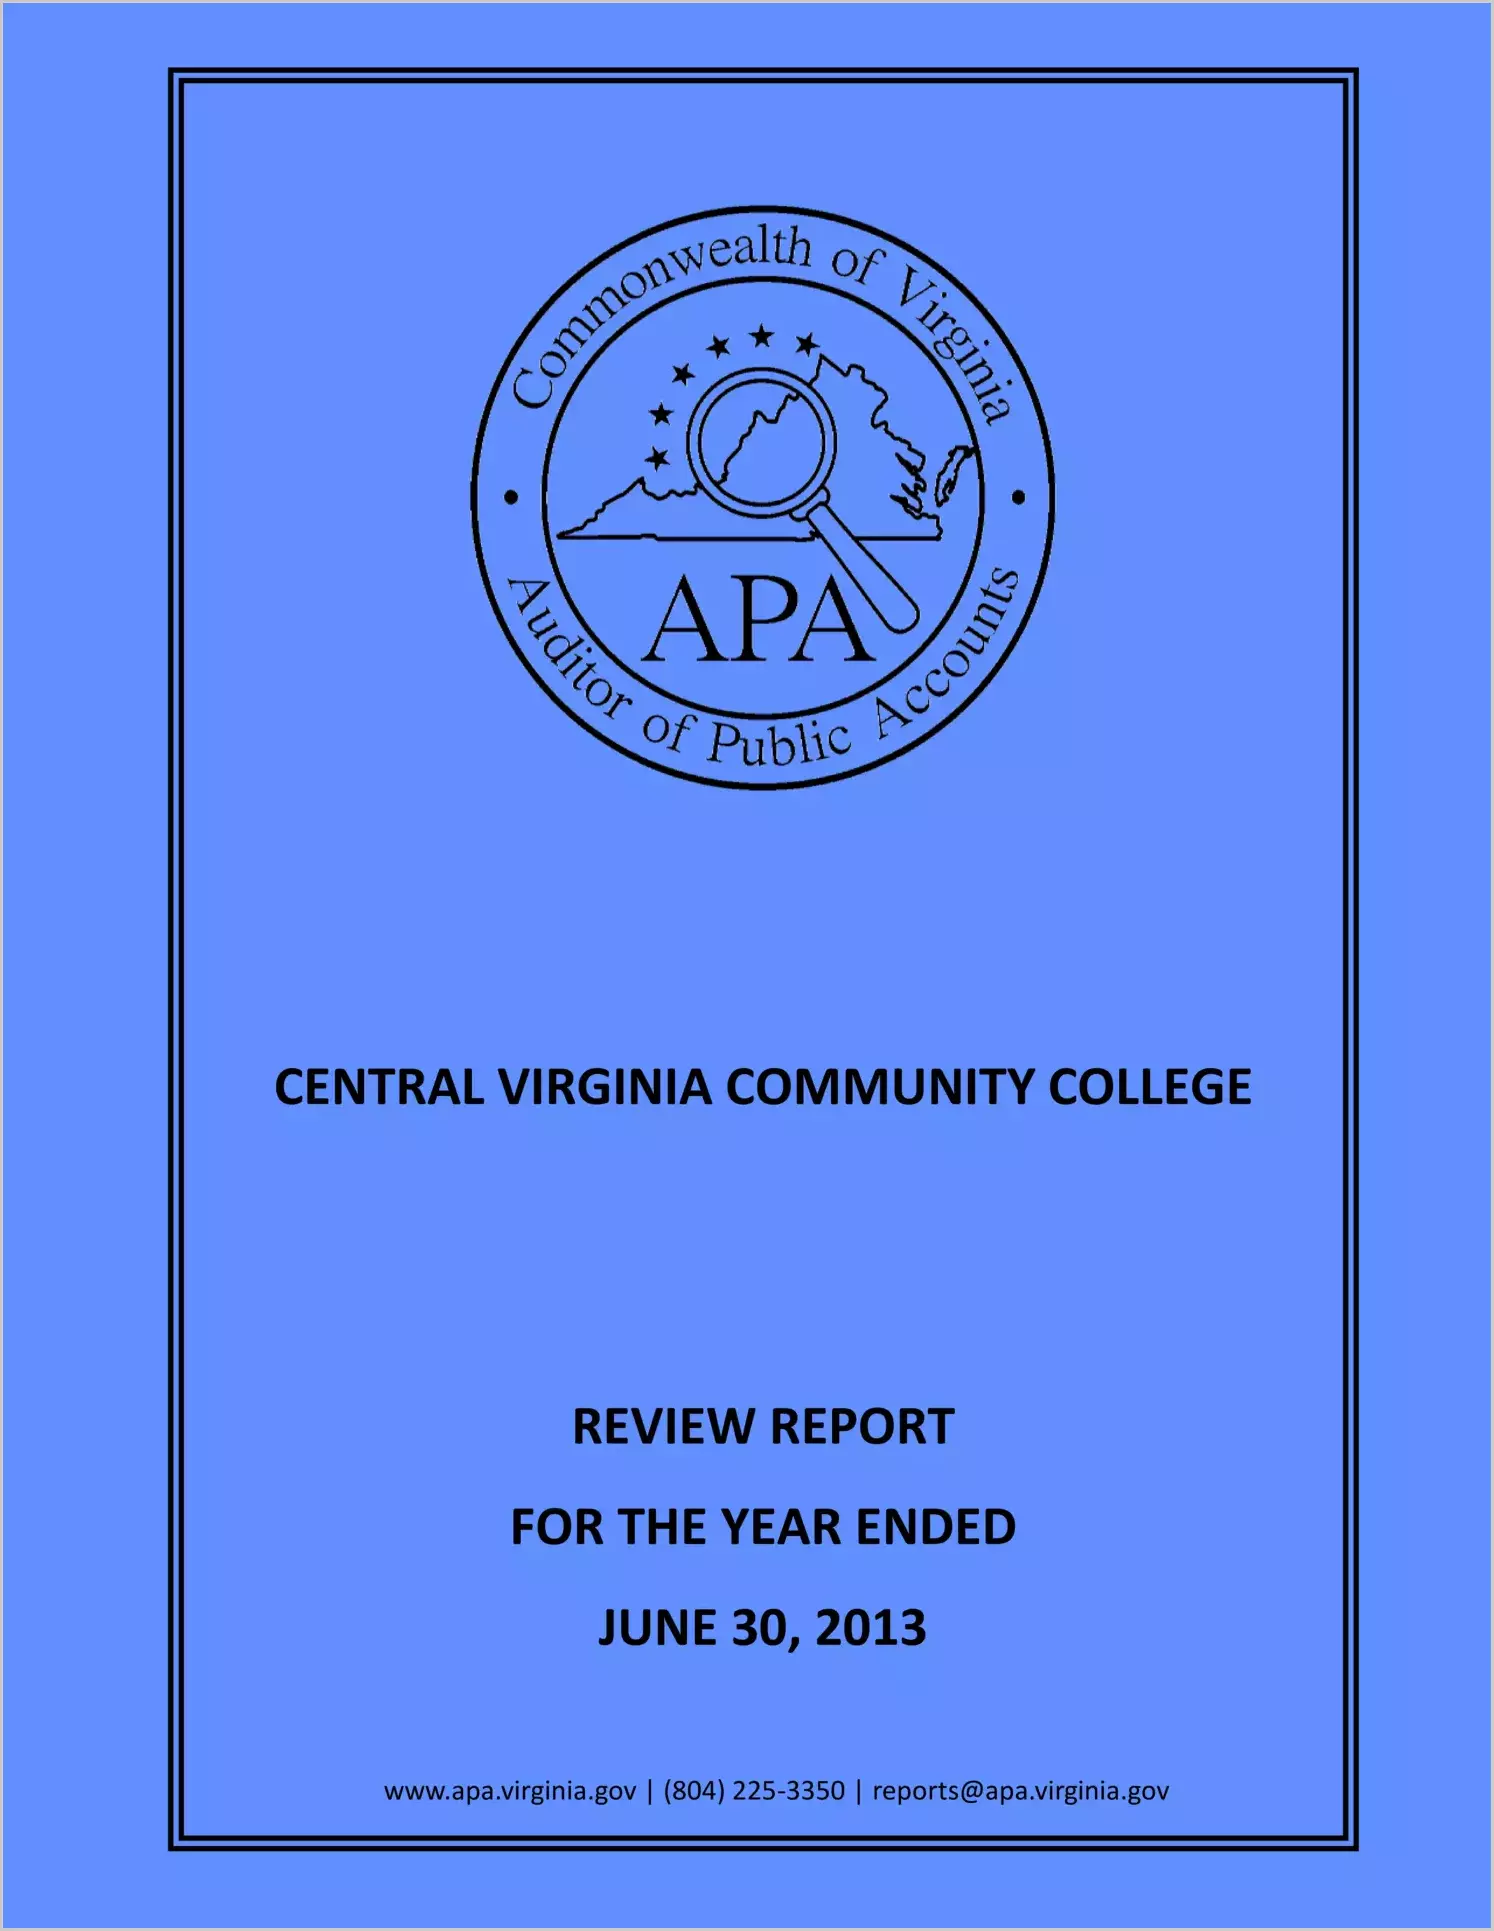 Central Virginia Community College for the year ended June 30, 2013